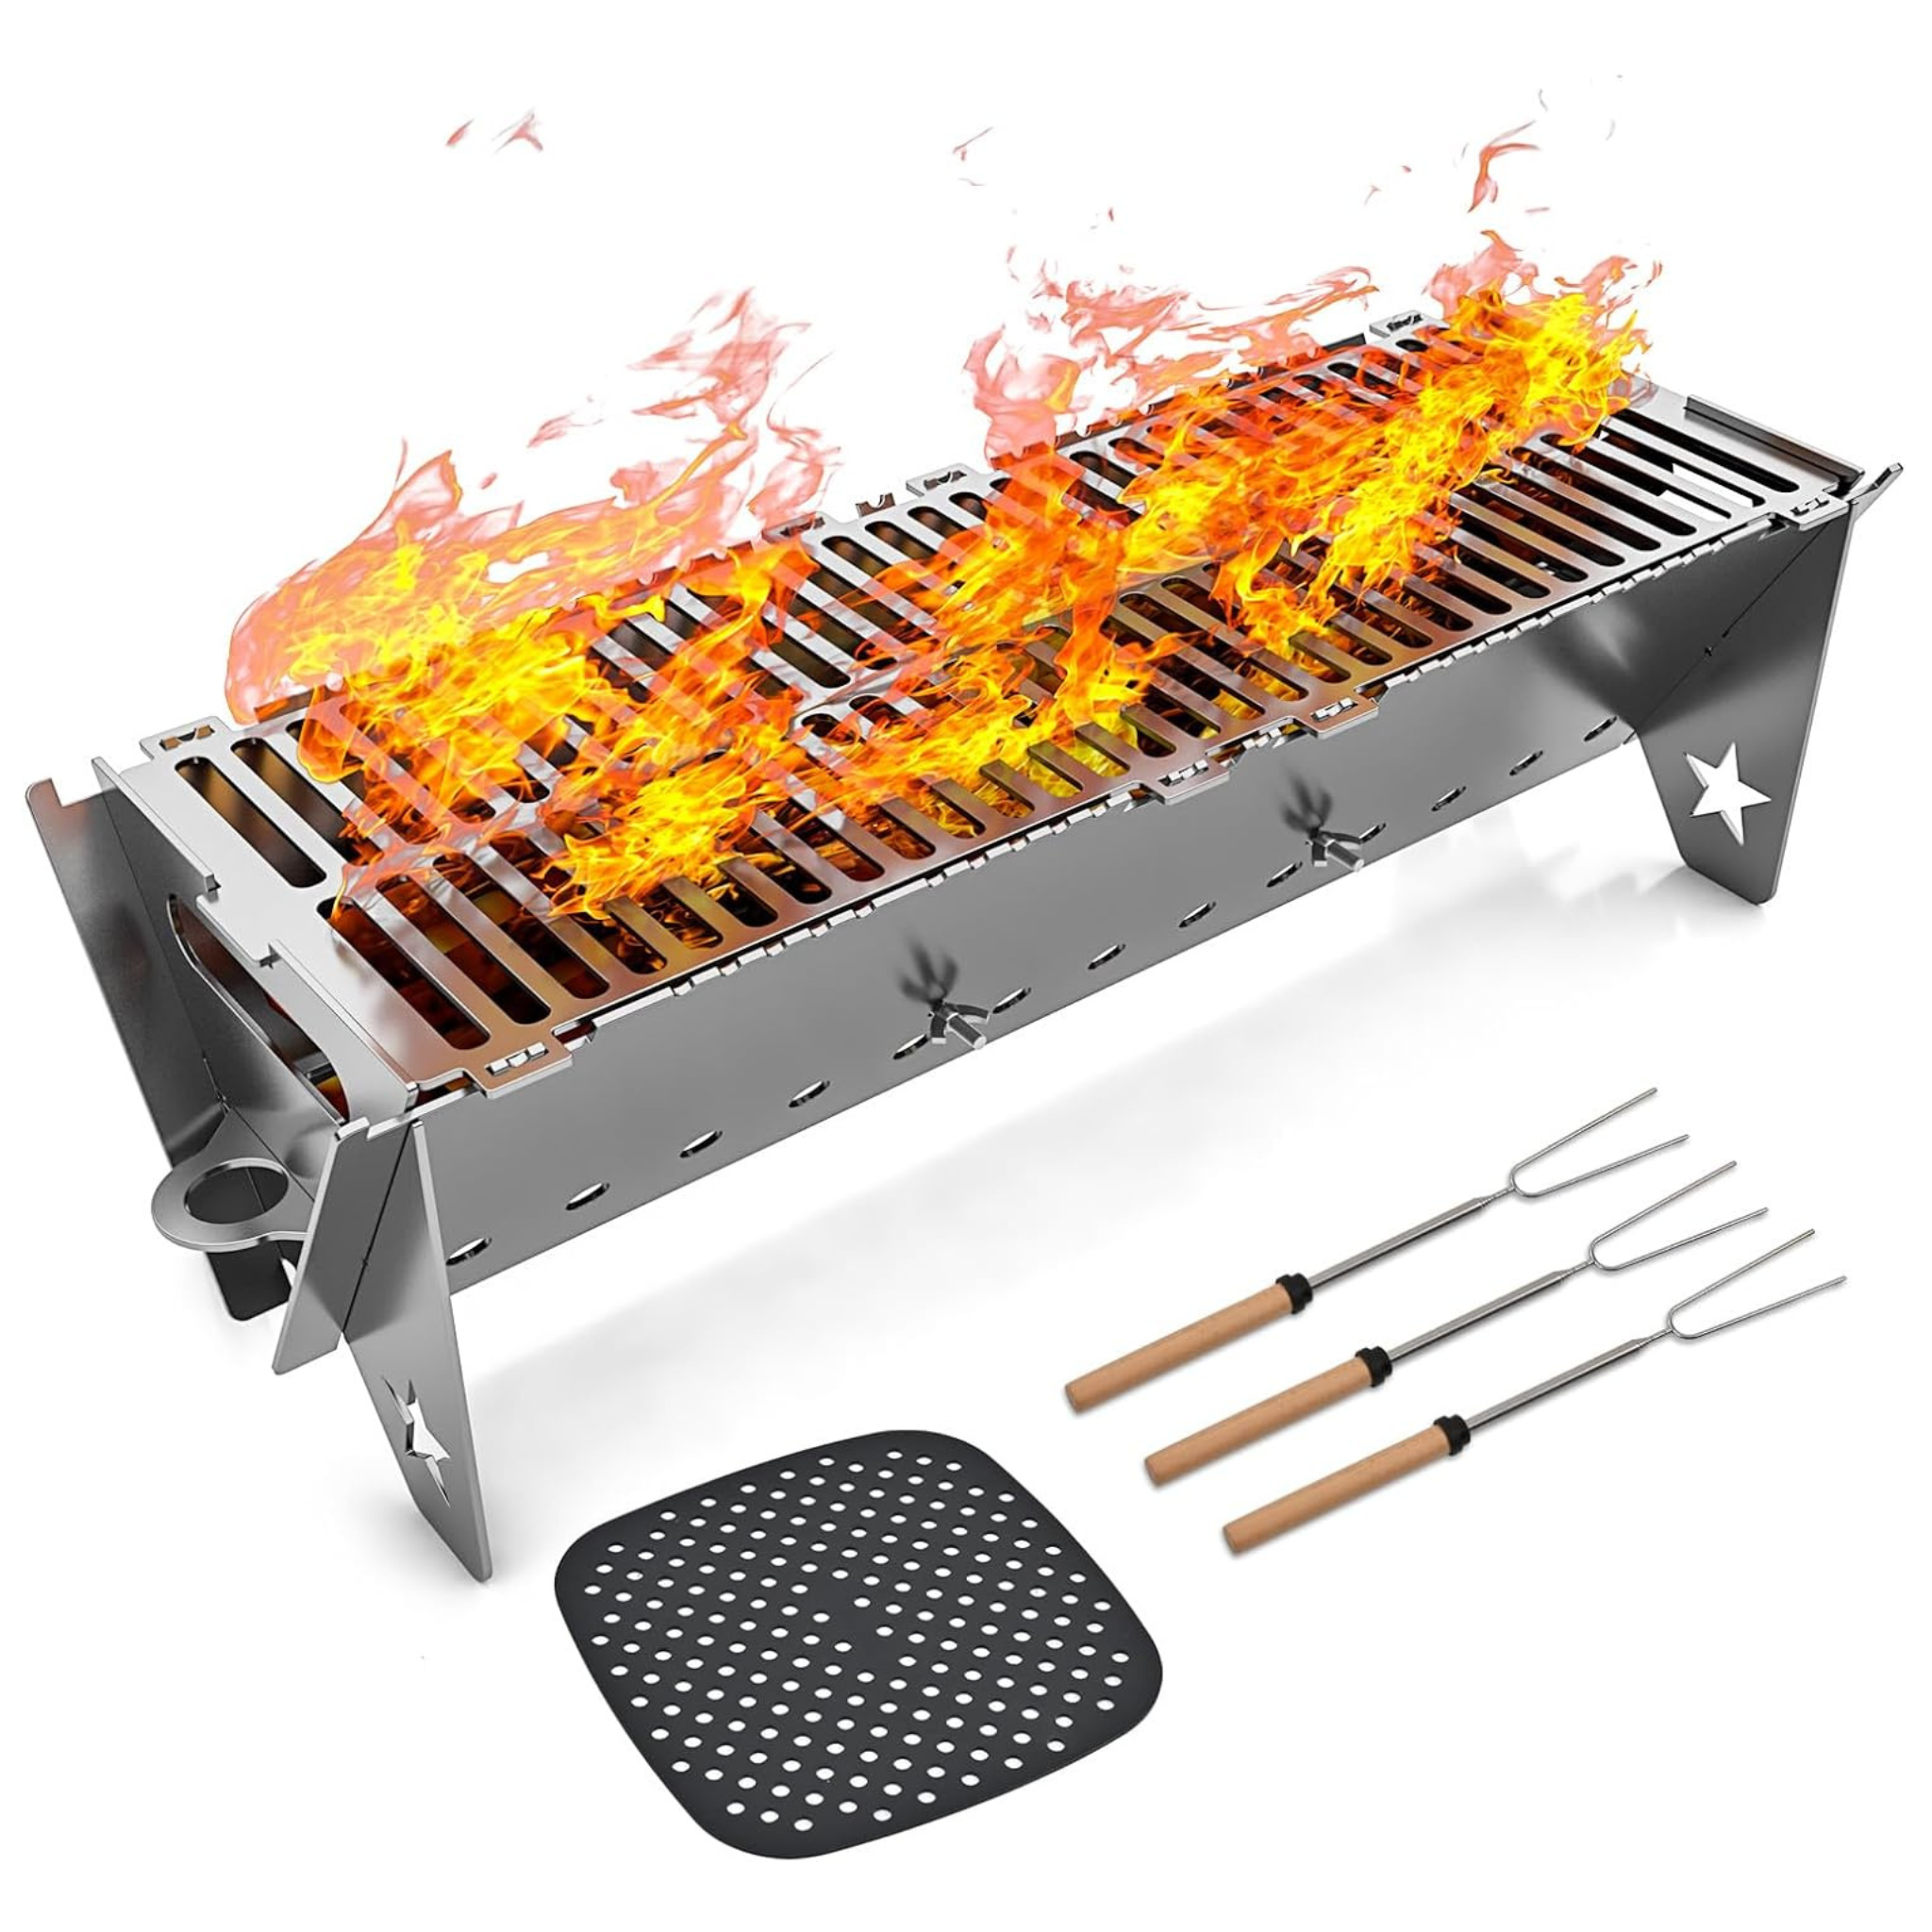 2-in-1 Sisaywey Frying & Grilling Portable Folding Charcoal BBQ Grills